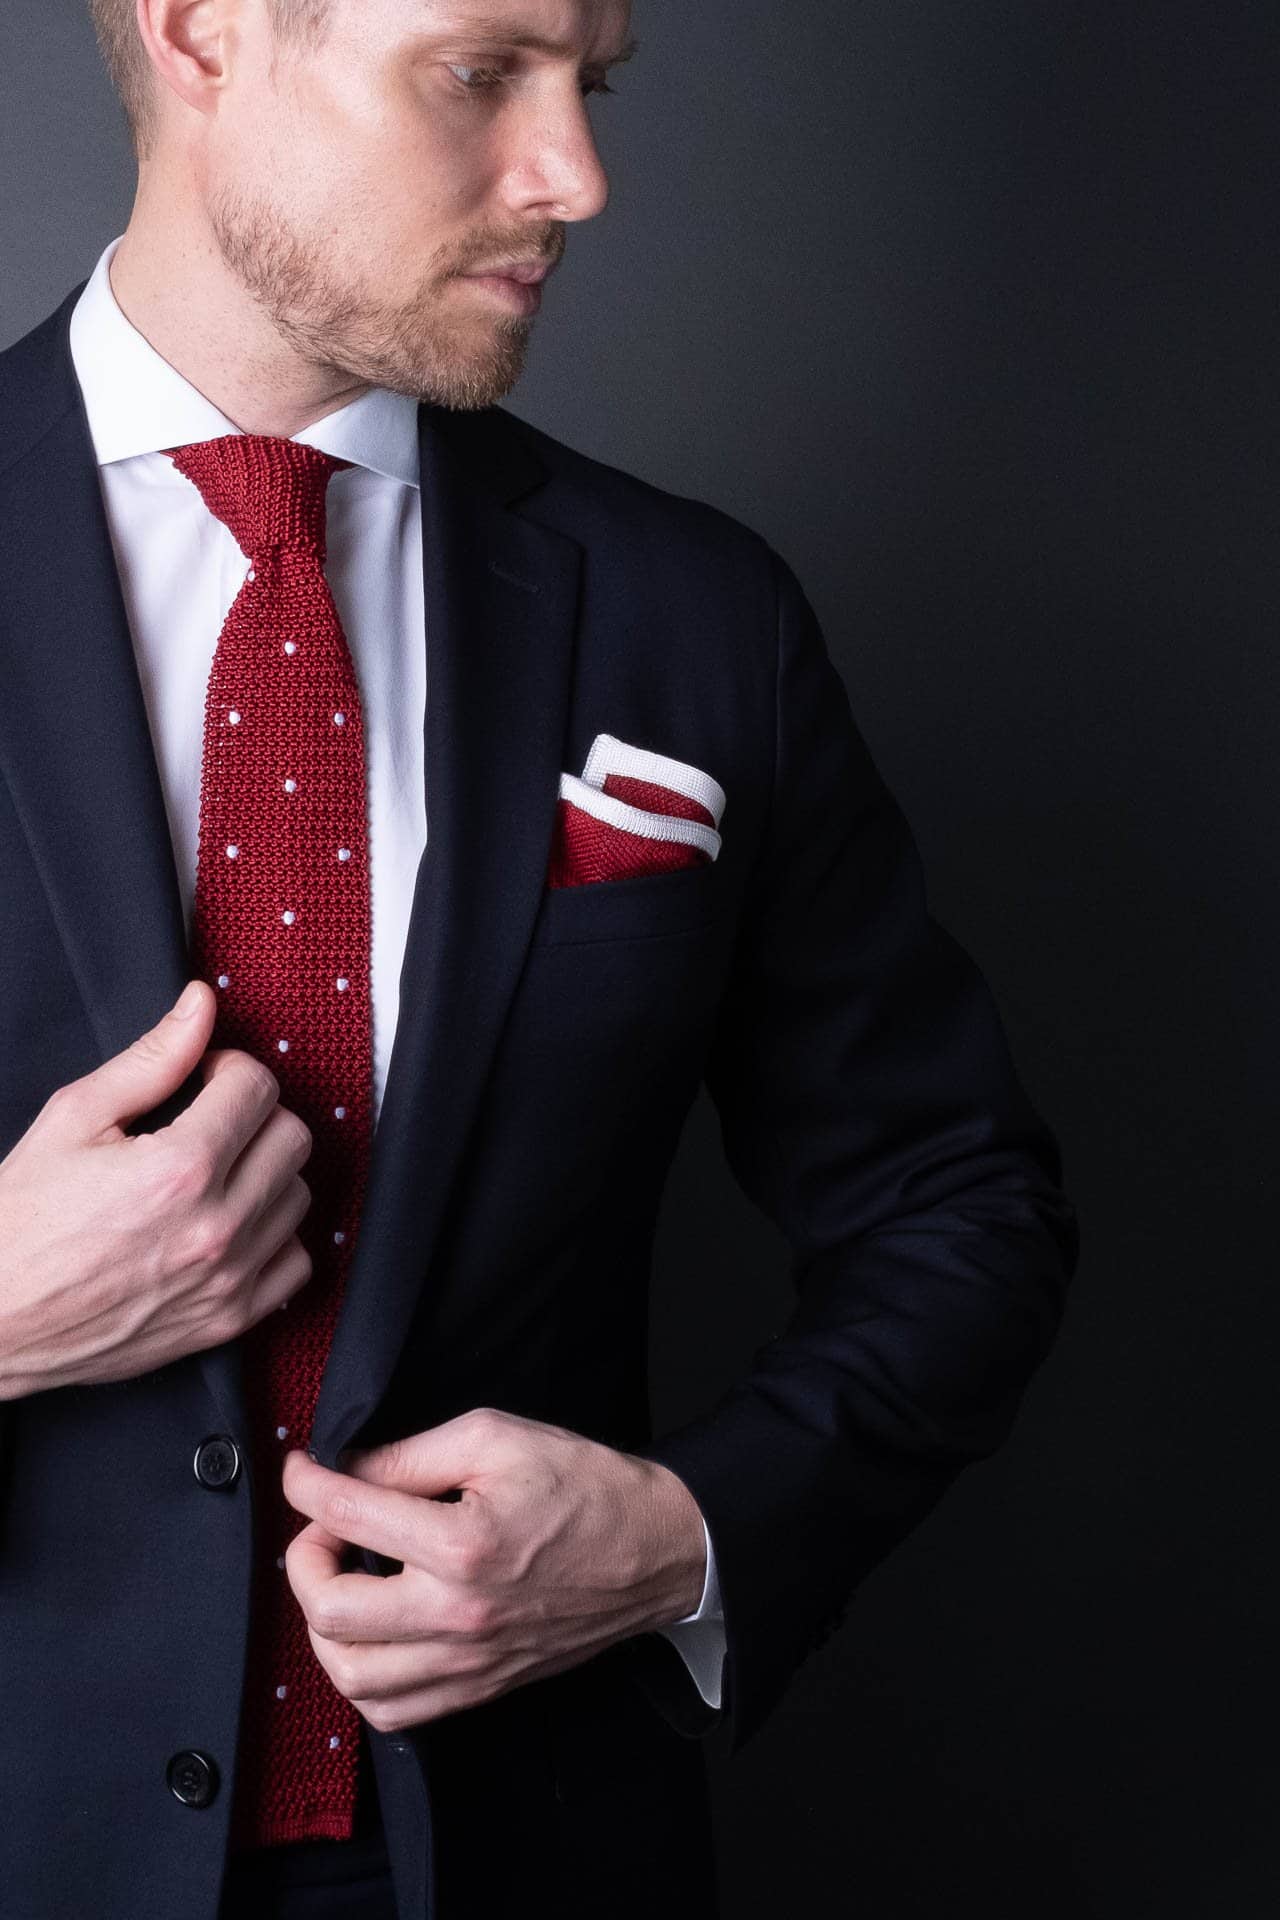 silk-knitted-tie-with-square-tip-red-with-polka-dots-made-in-italy-combo-matching-pocket-square